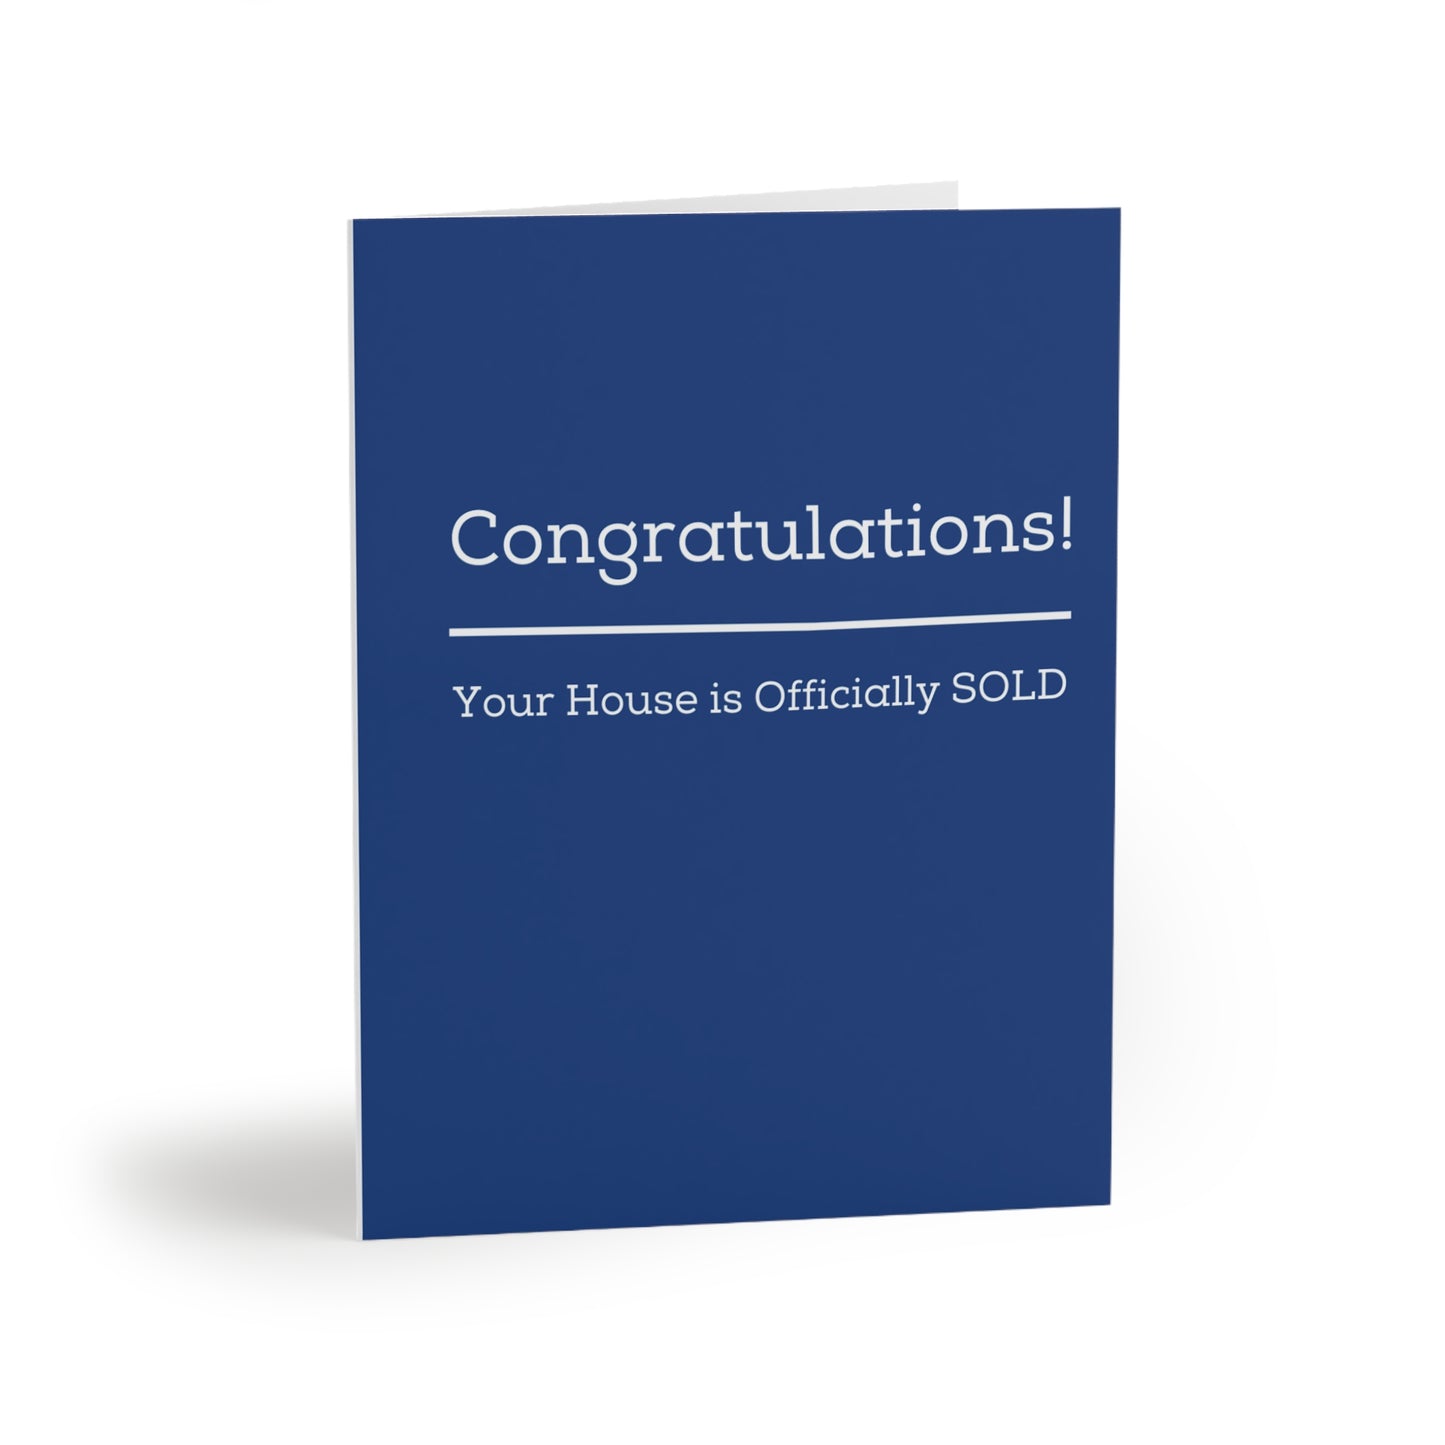 "Your House is SOLD" Blue - Cards for Real Estate Agents (8, 16, and 24 pcs)